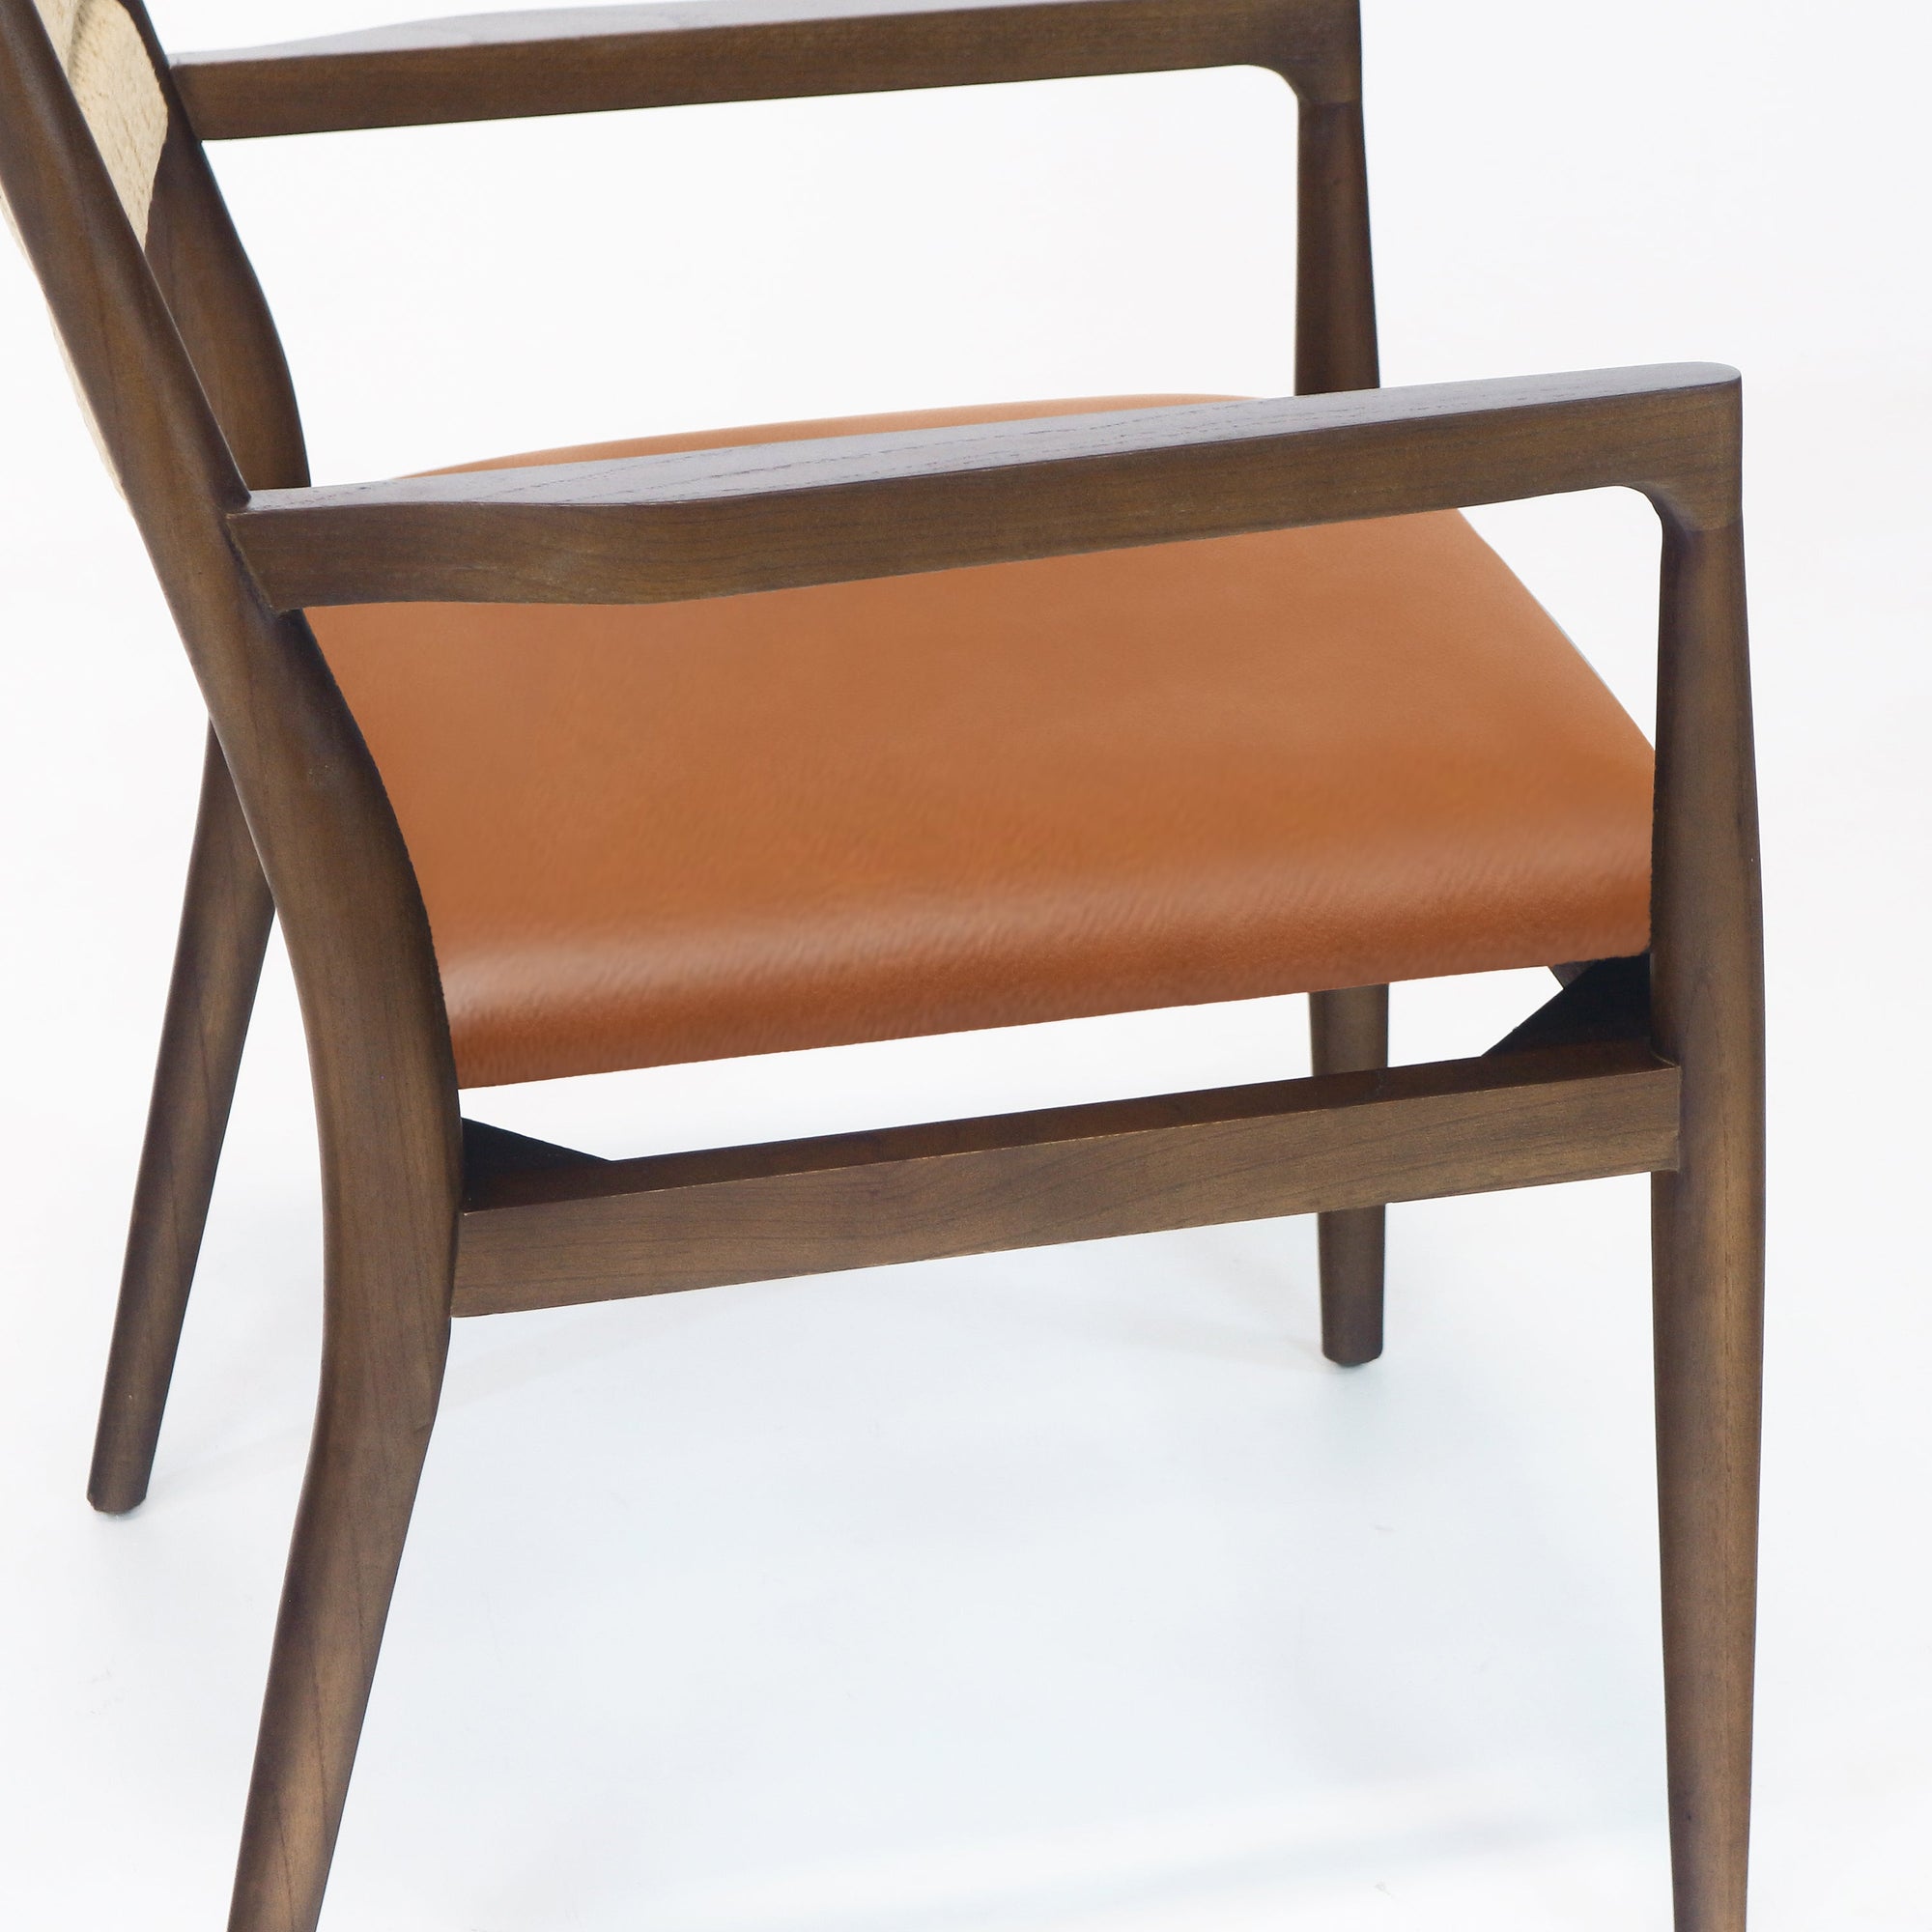 Samsara Dining Chair with Rope Backrest with Tan Leather Seat - INTERIORTONIC